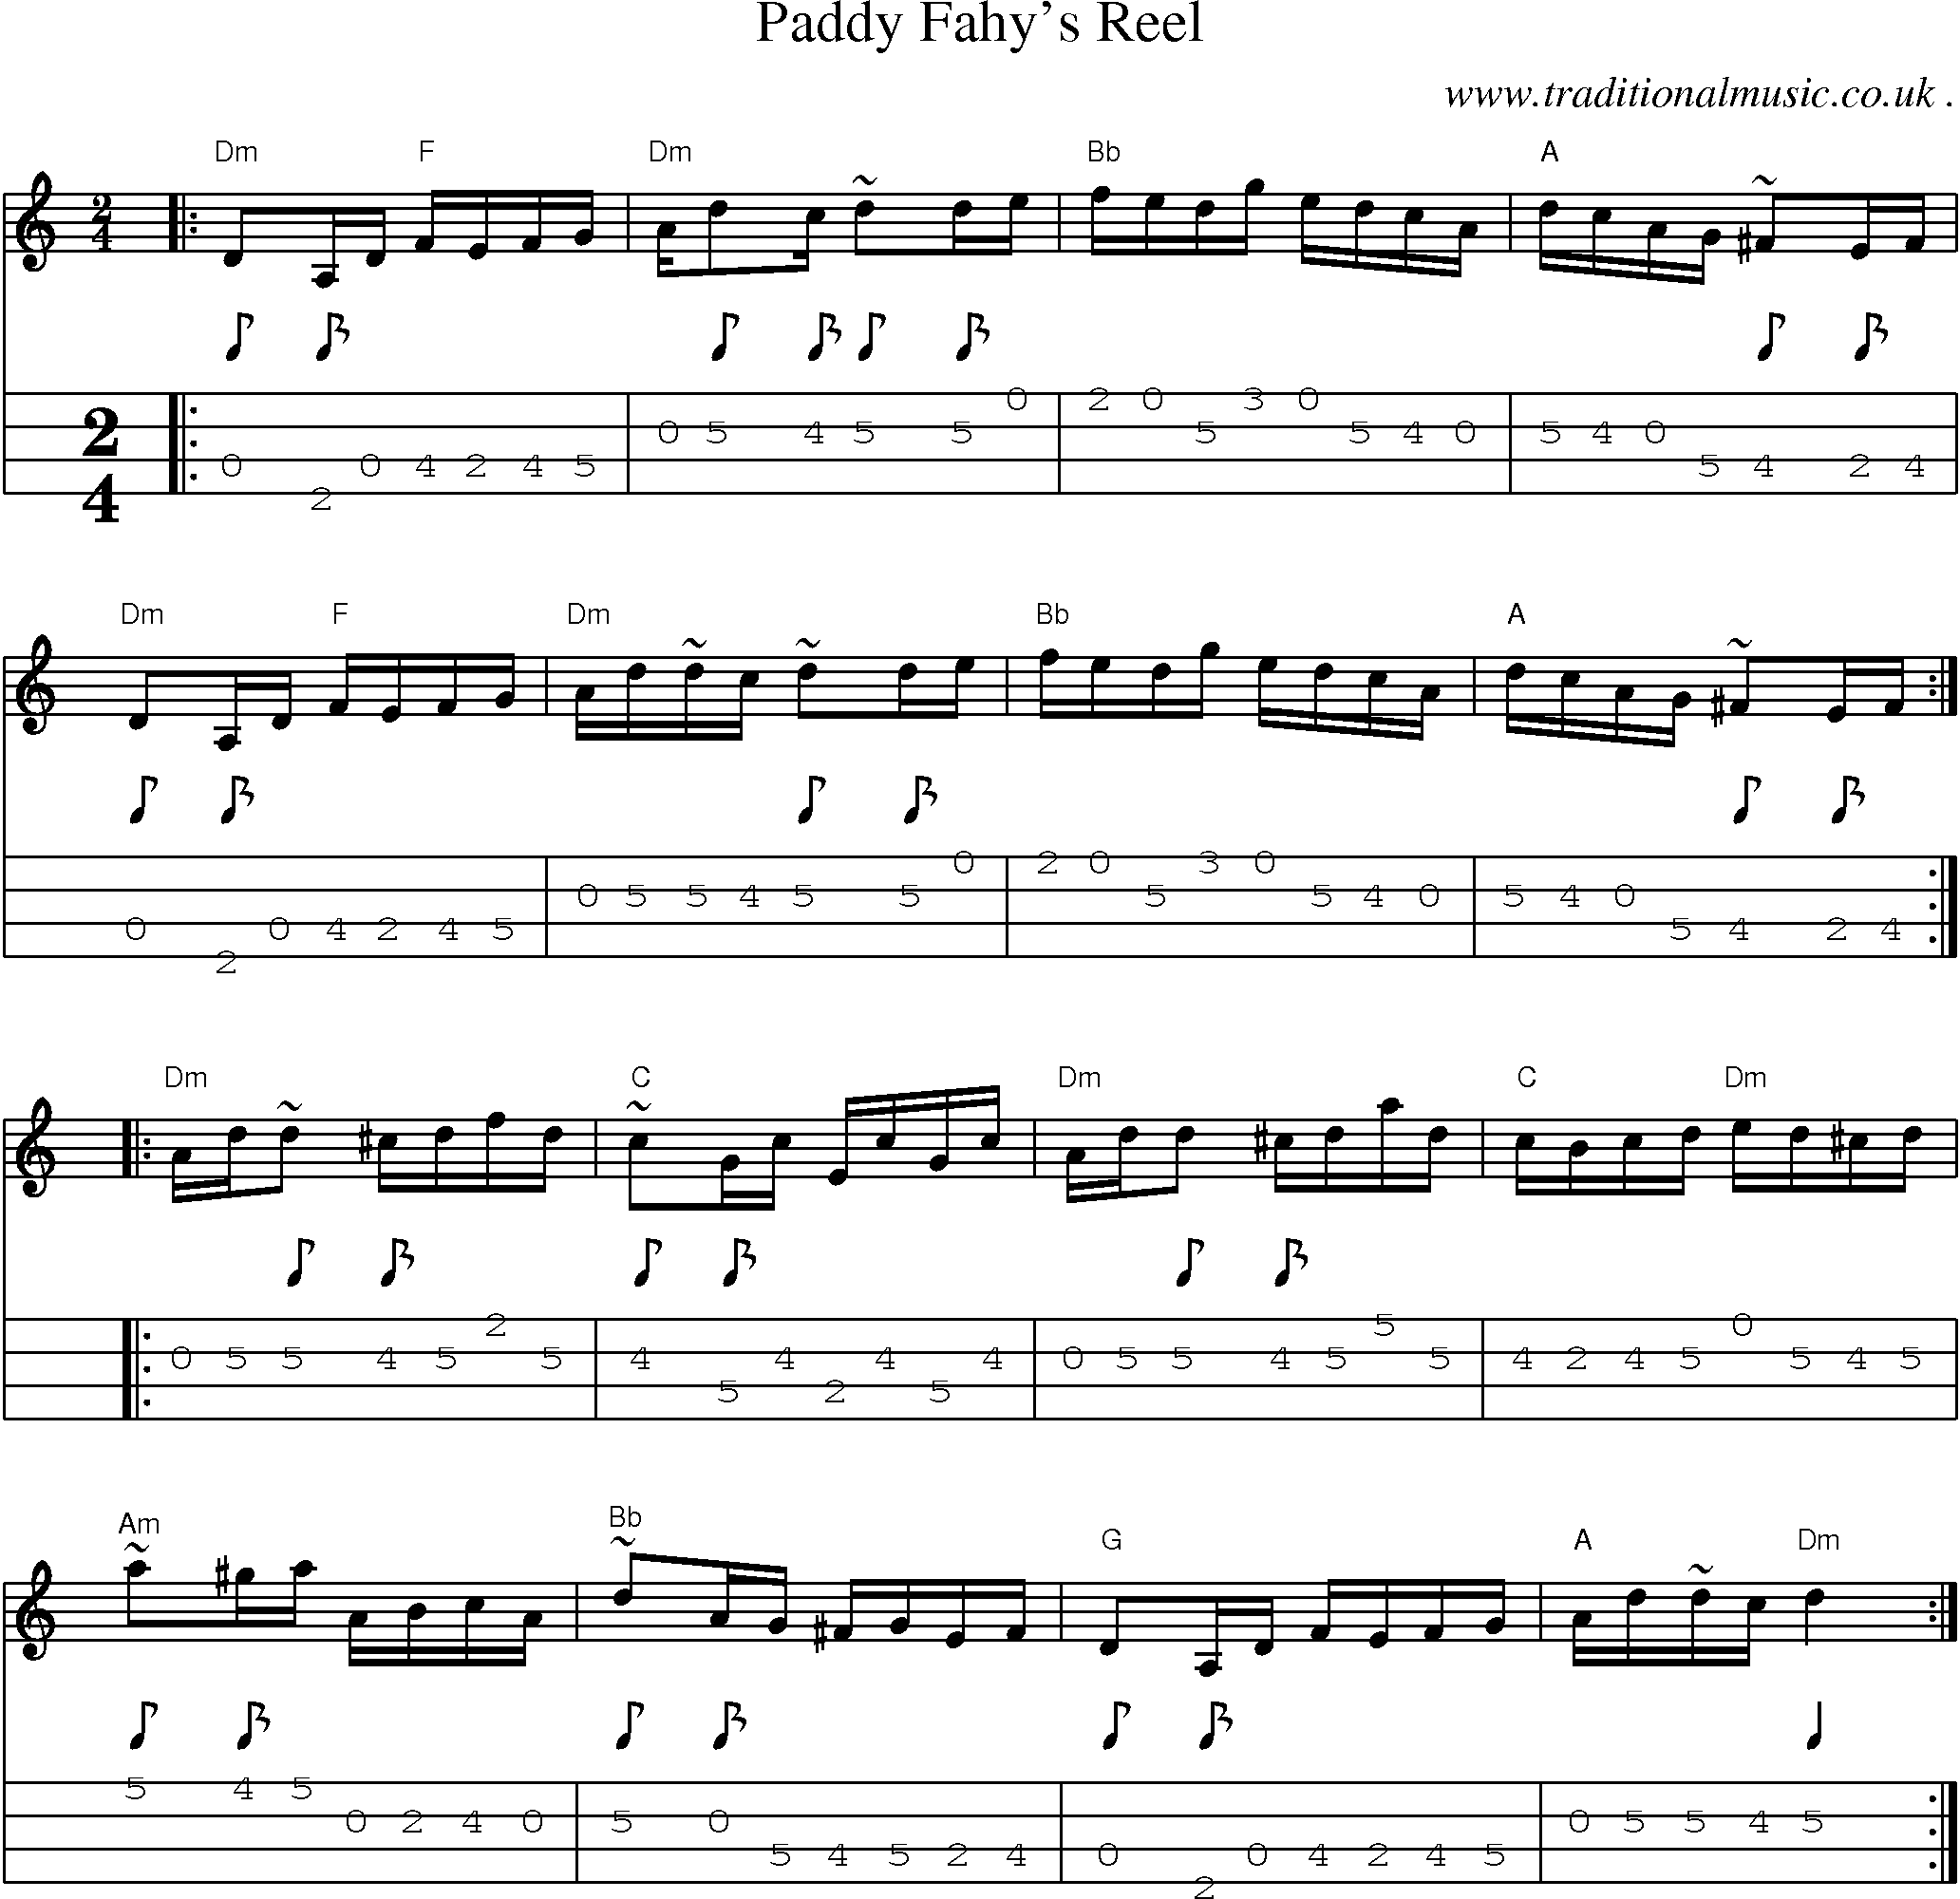 Music Score and Guitar Tabs for Paddy Fahys Reel